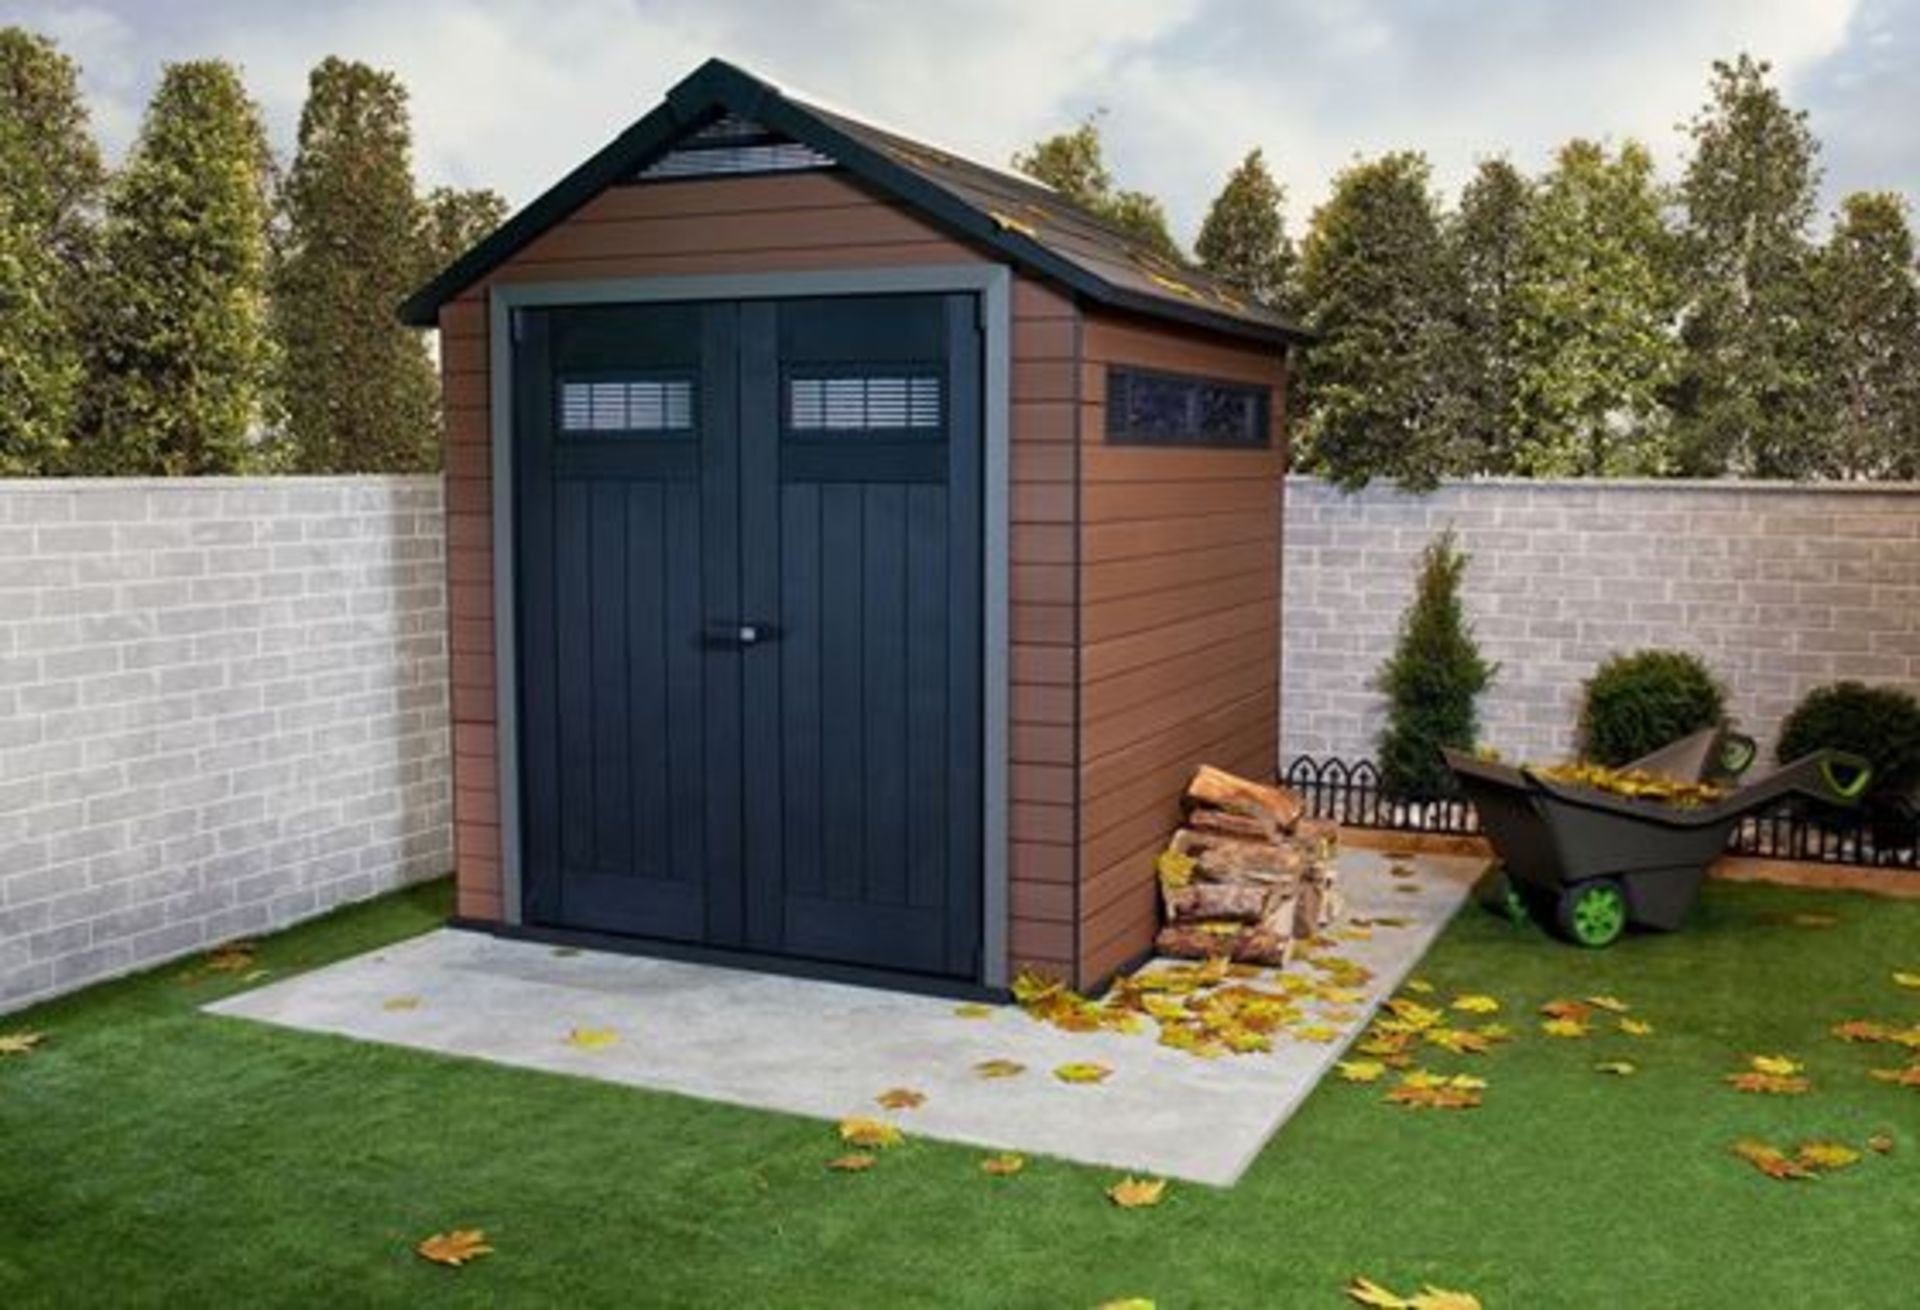 Keter Fusion 757 Garden Shed - As new but unboxed on pallet From the steel-reinforced tile roof down